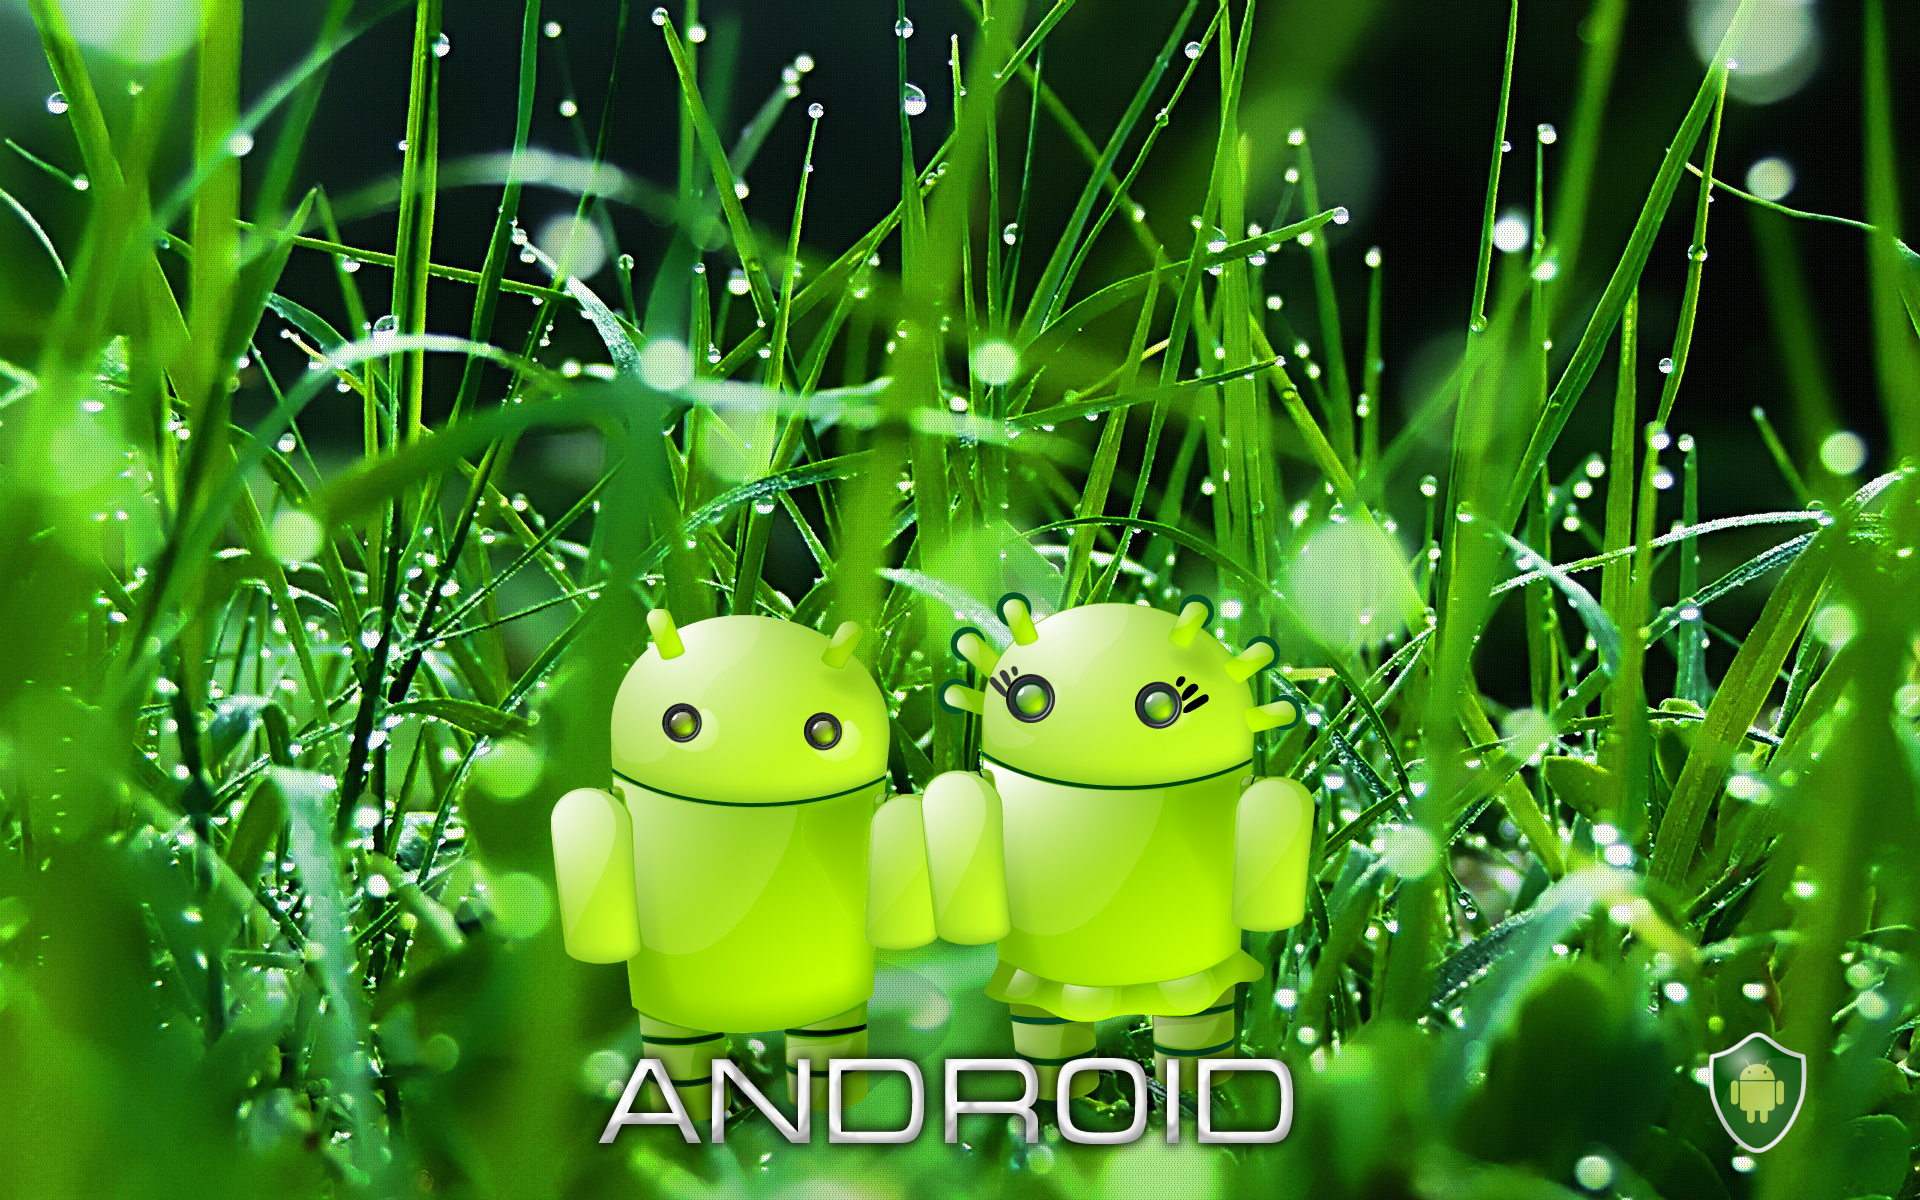 Android Nature Concept wallpapers55.com - Best Wallpapers for